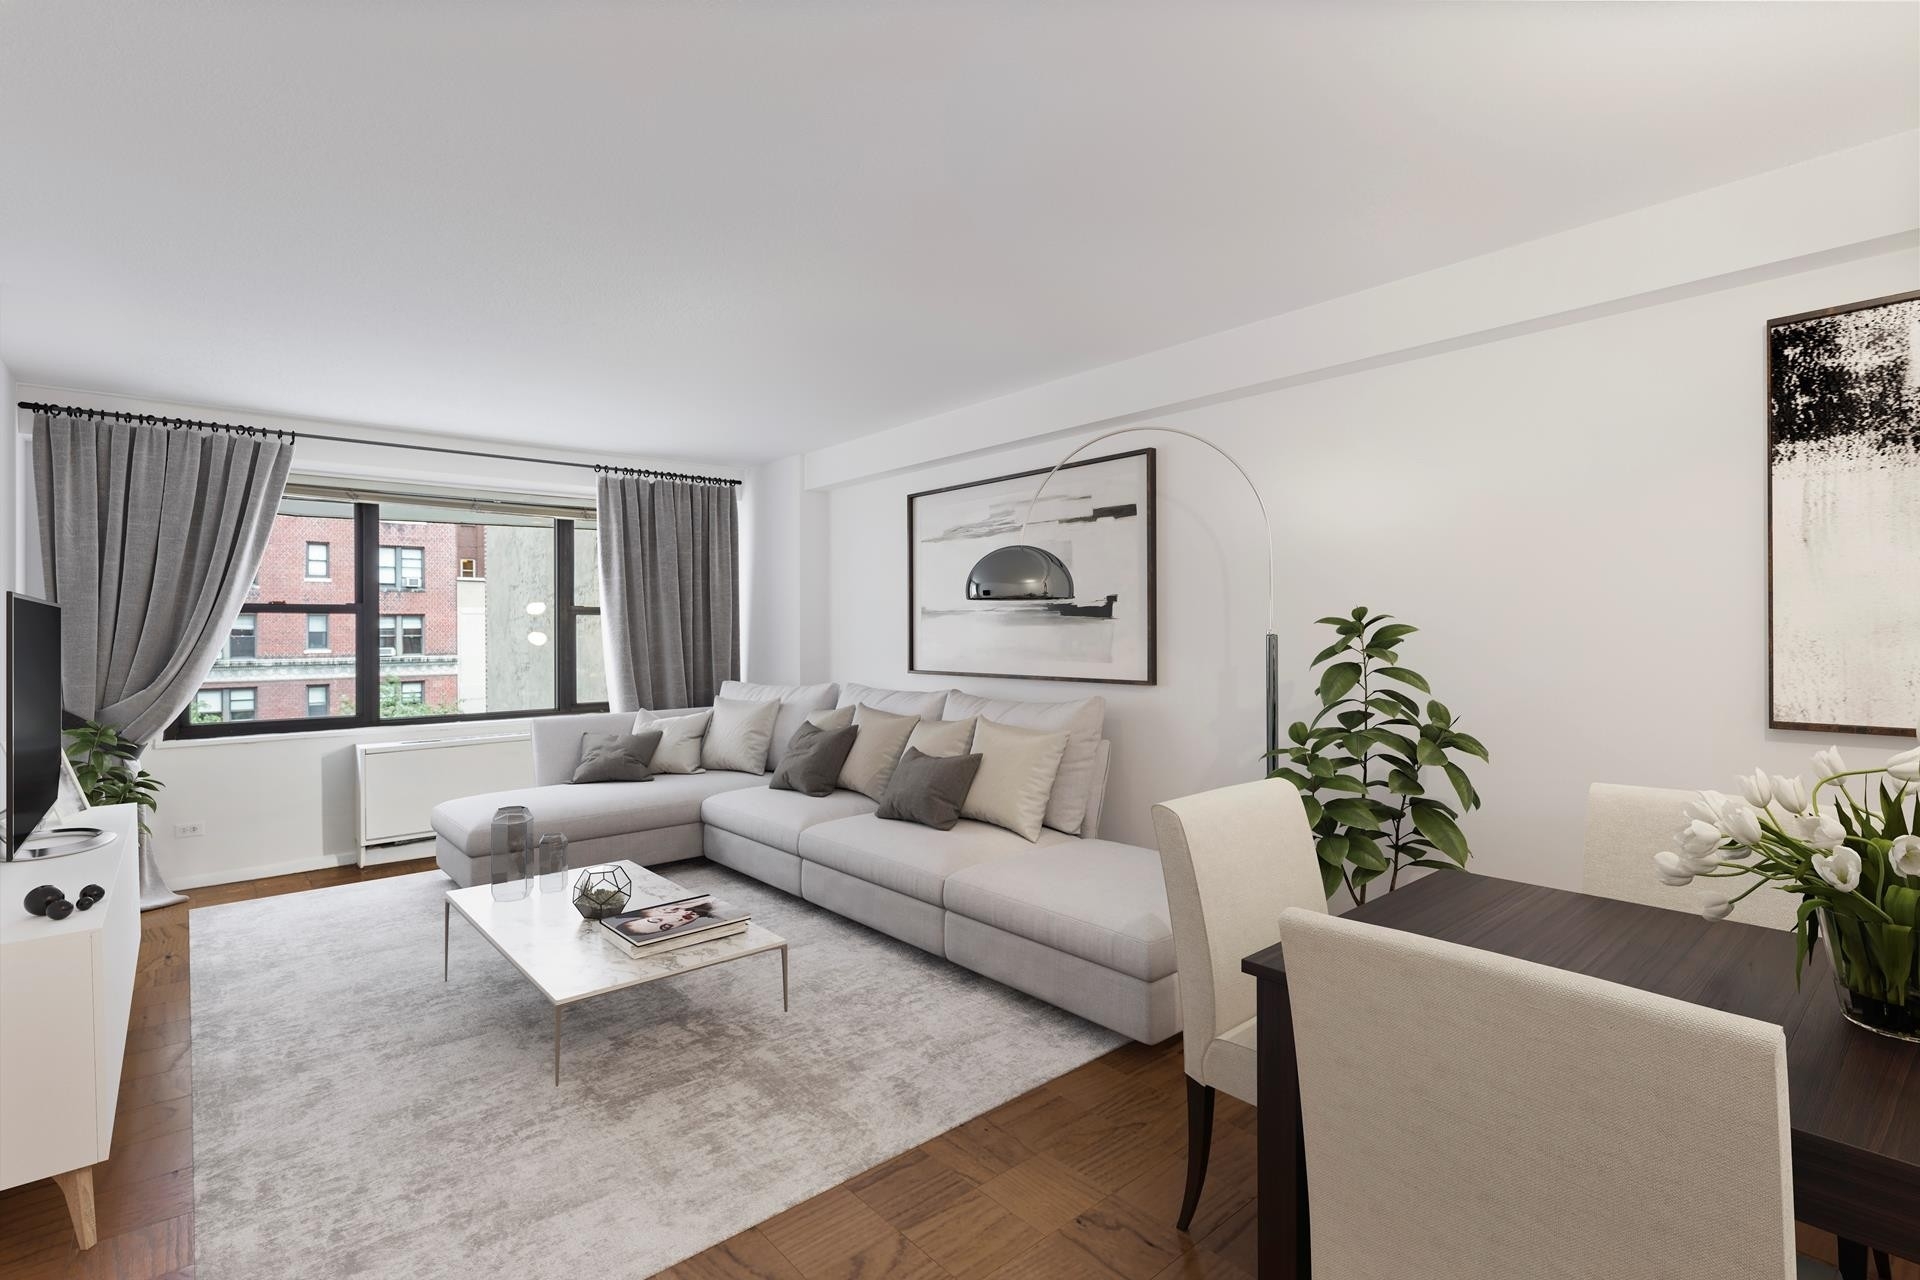 Property at 111 E 85TH ST, 4D Upper East Side, New York, New York 10028